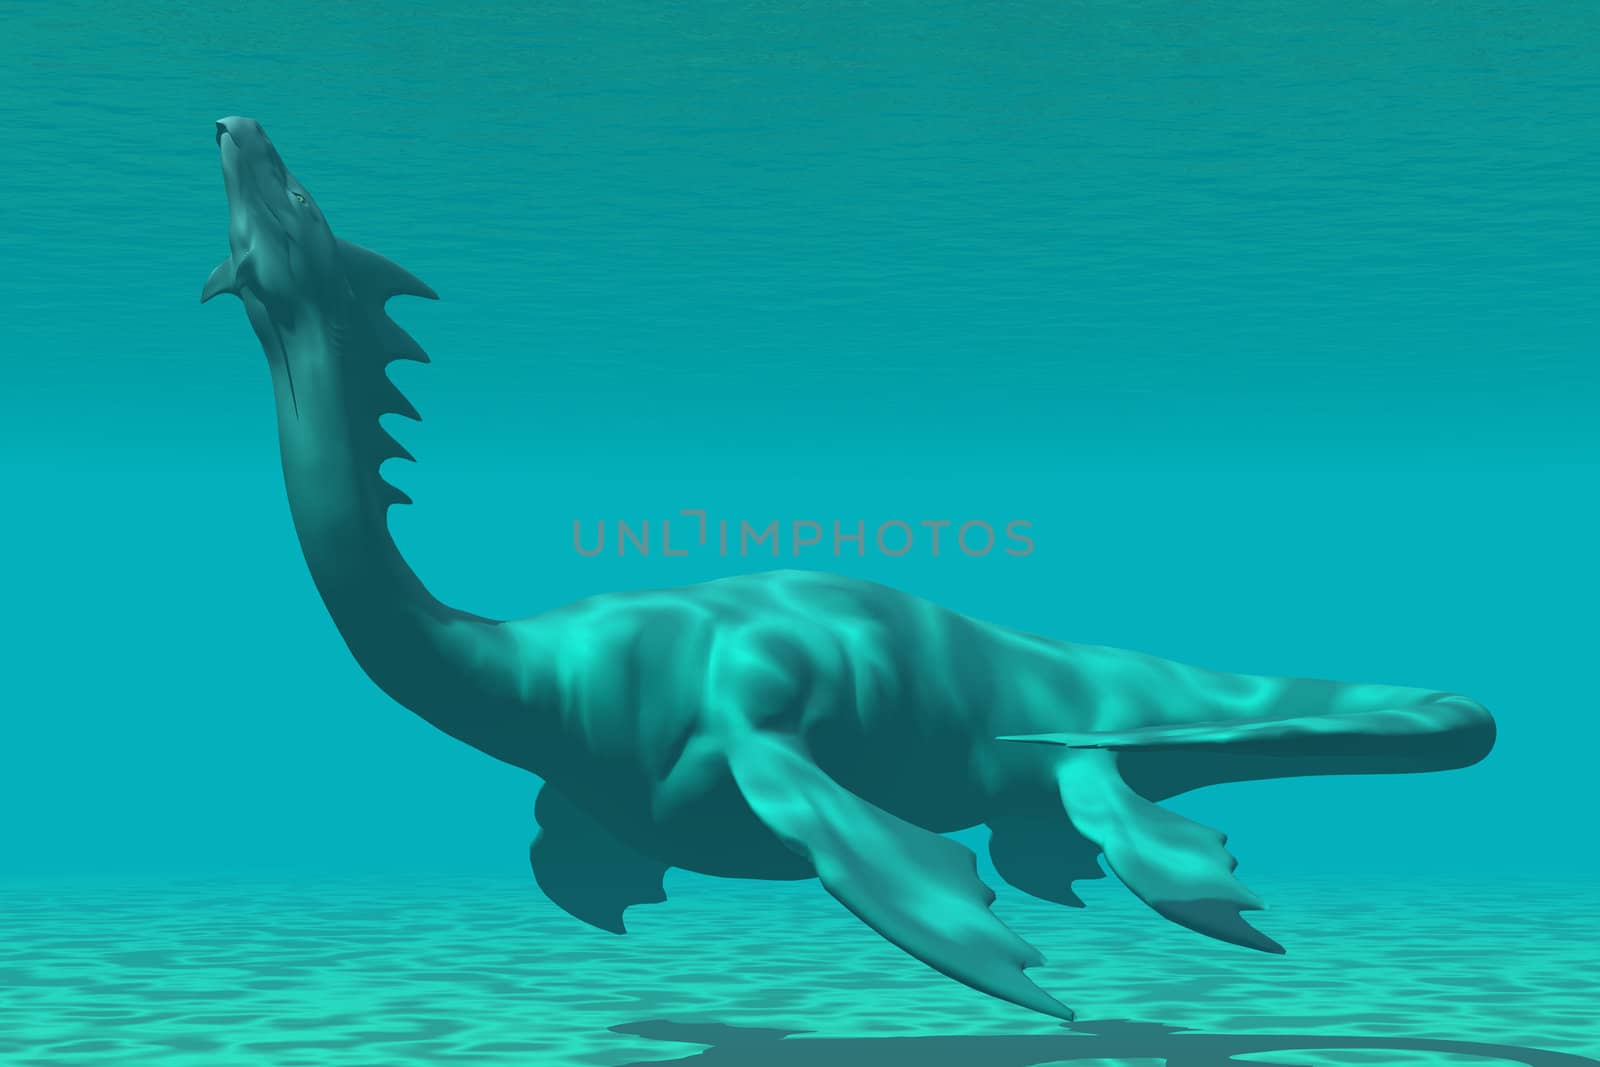 A mythical sea dragon creature is reminiscent of the dinosaur called Plesiosaurus.